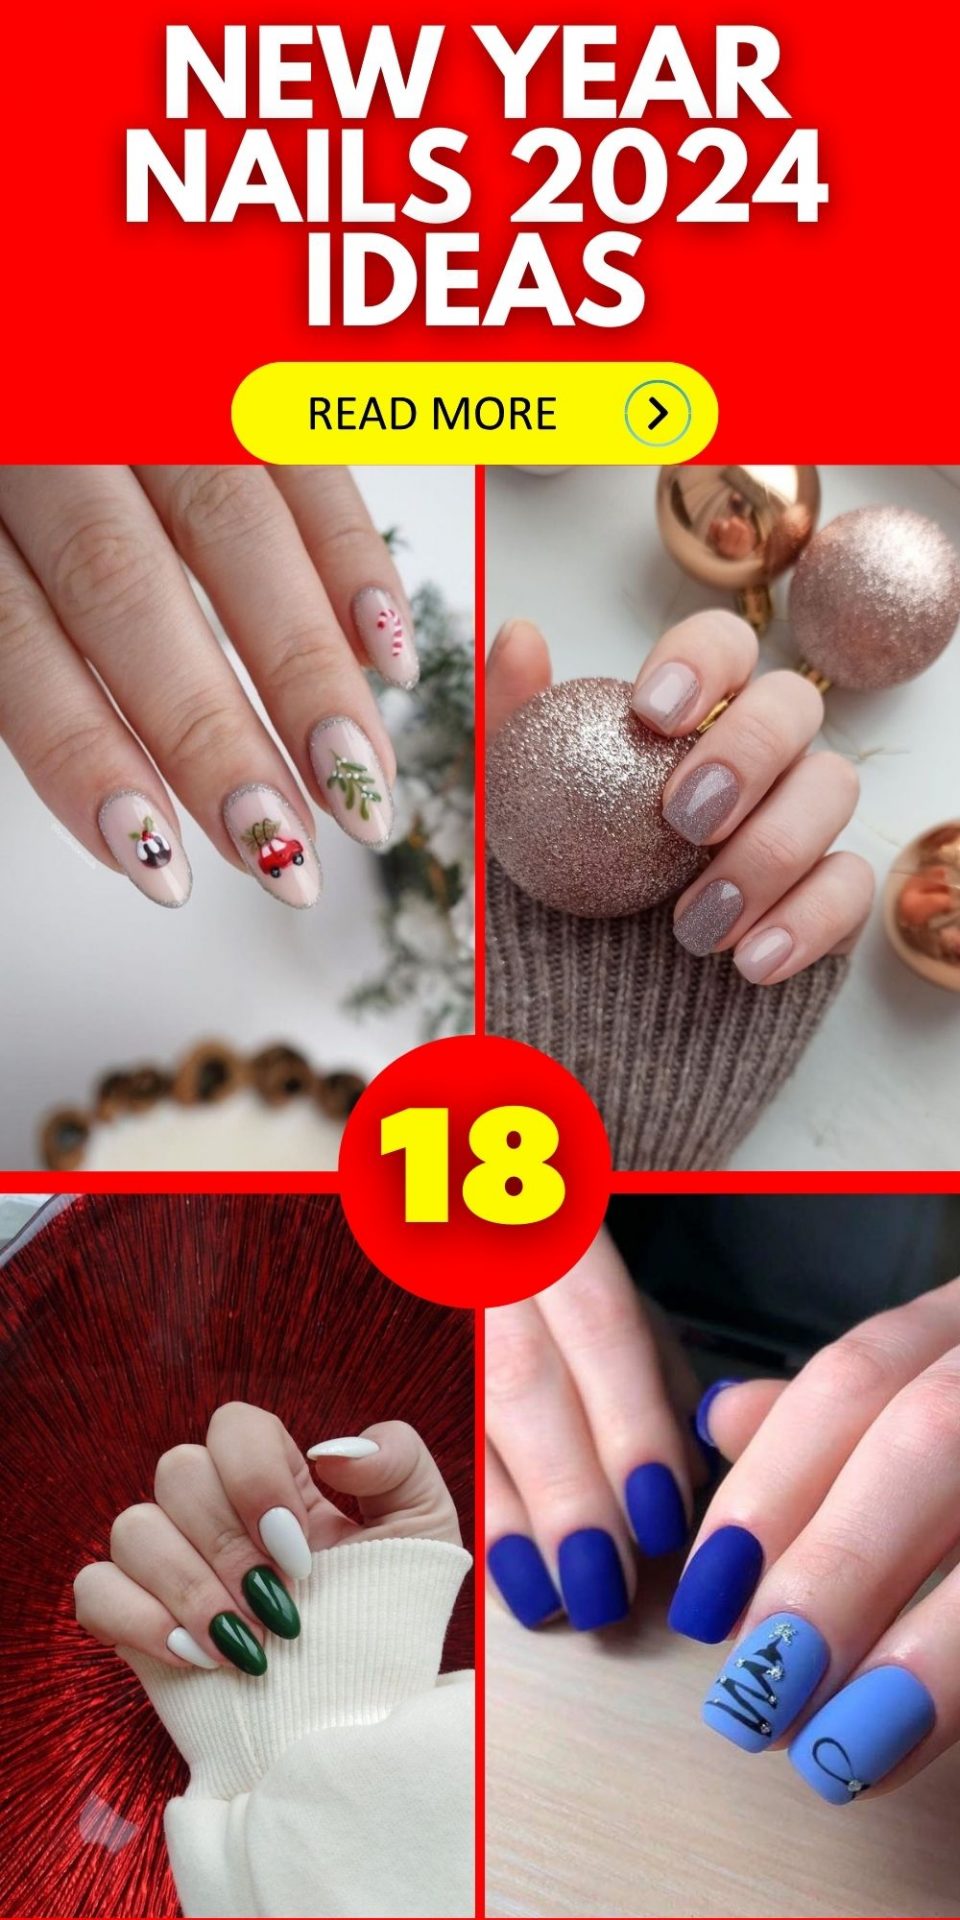 2024 Nail Trends: Designs, Almond Shapes, Glitter, and More - Lunar New ...